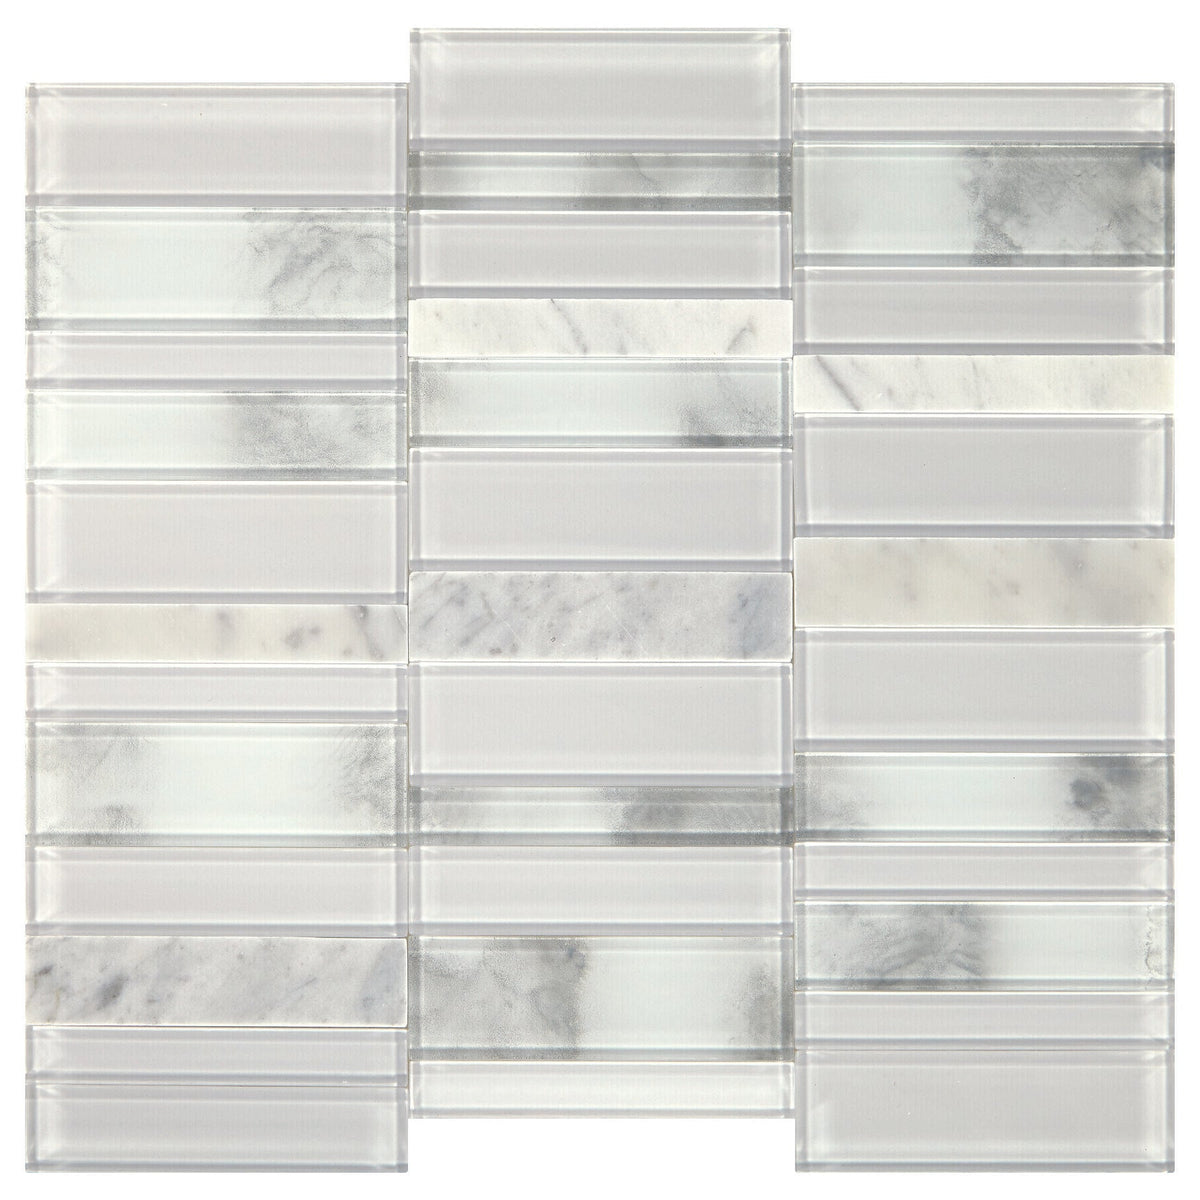 Daltile - Simplystick Mosaix - Straight Stack Mosaic - Stormy Mist